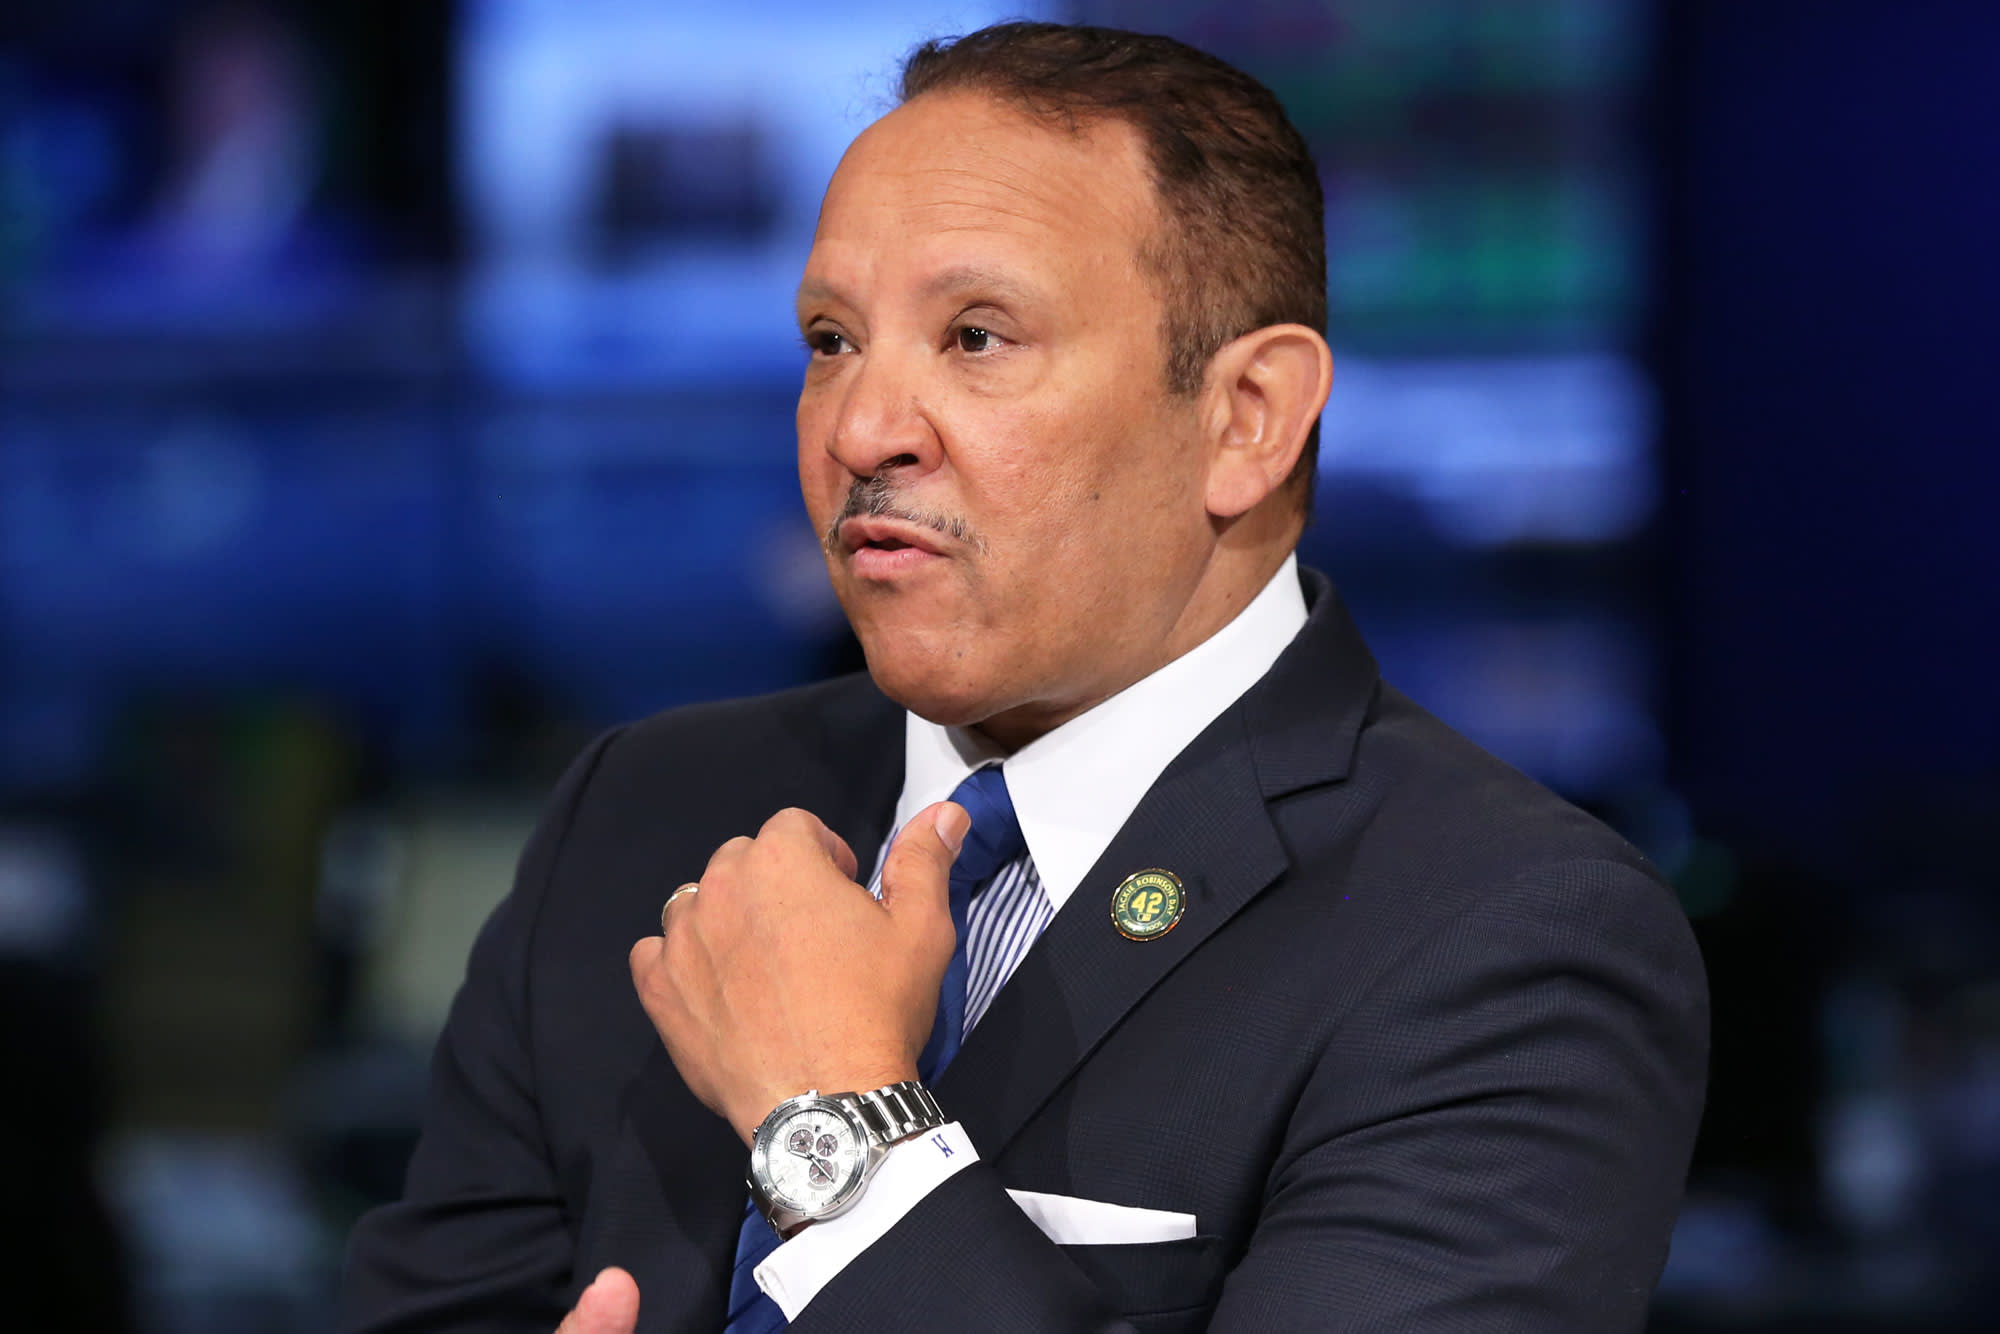 There is a scarcity of good-paying jobs in post-pandemic world, Marc Morial says